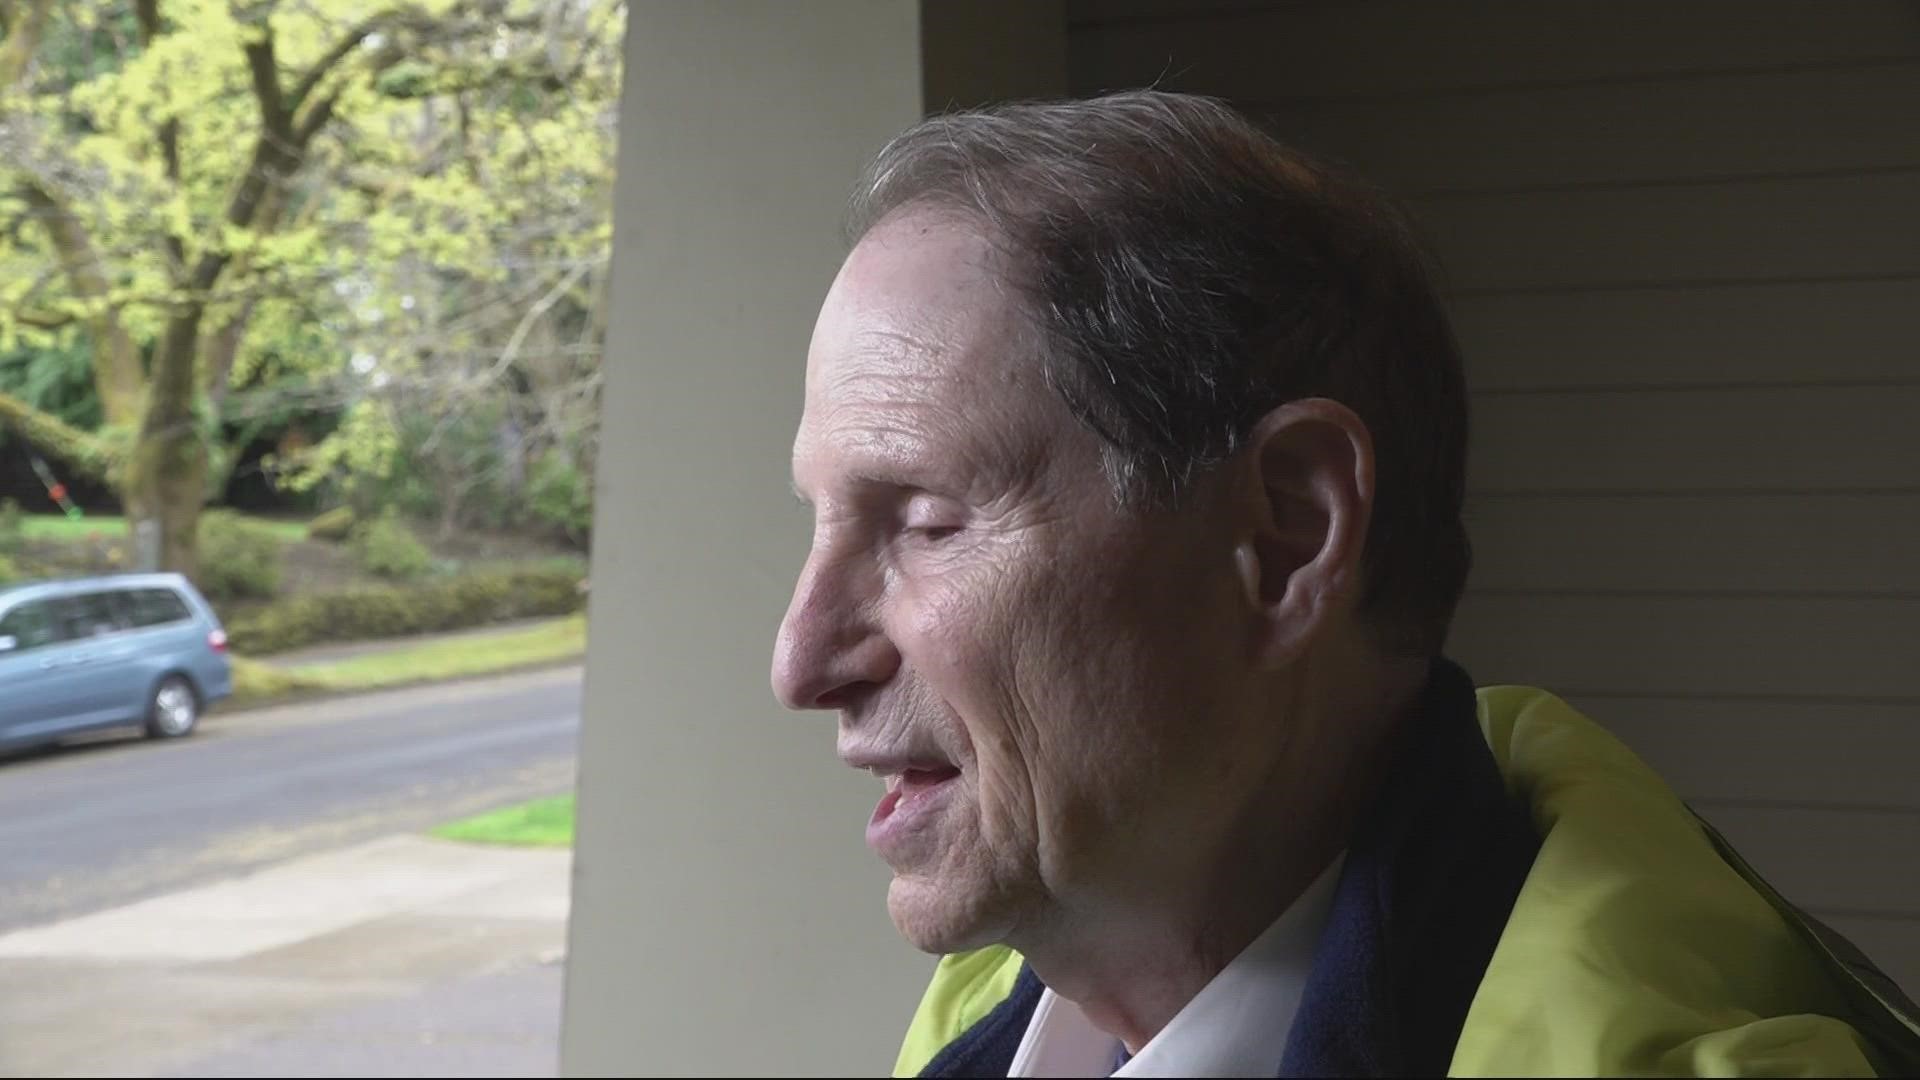 President Joe Biden is expected to visit Portland on Thursday, April 21, to discuss infrastructure. Here's what Sen. Ron Wyden had to say of his planned visit.